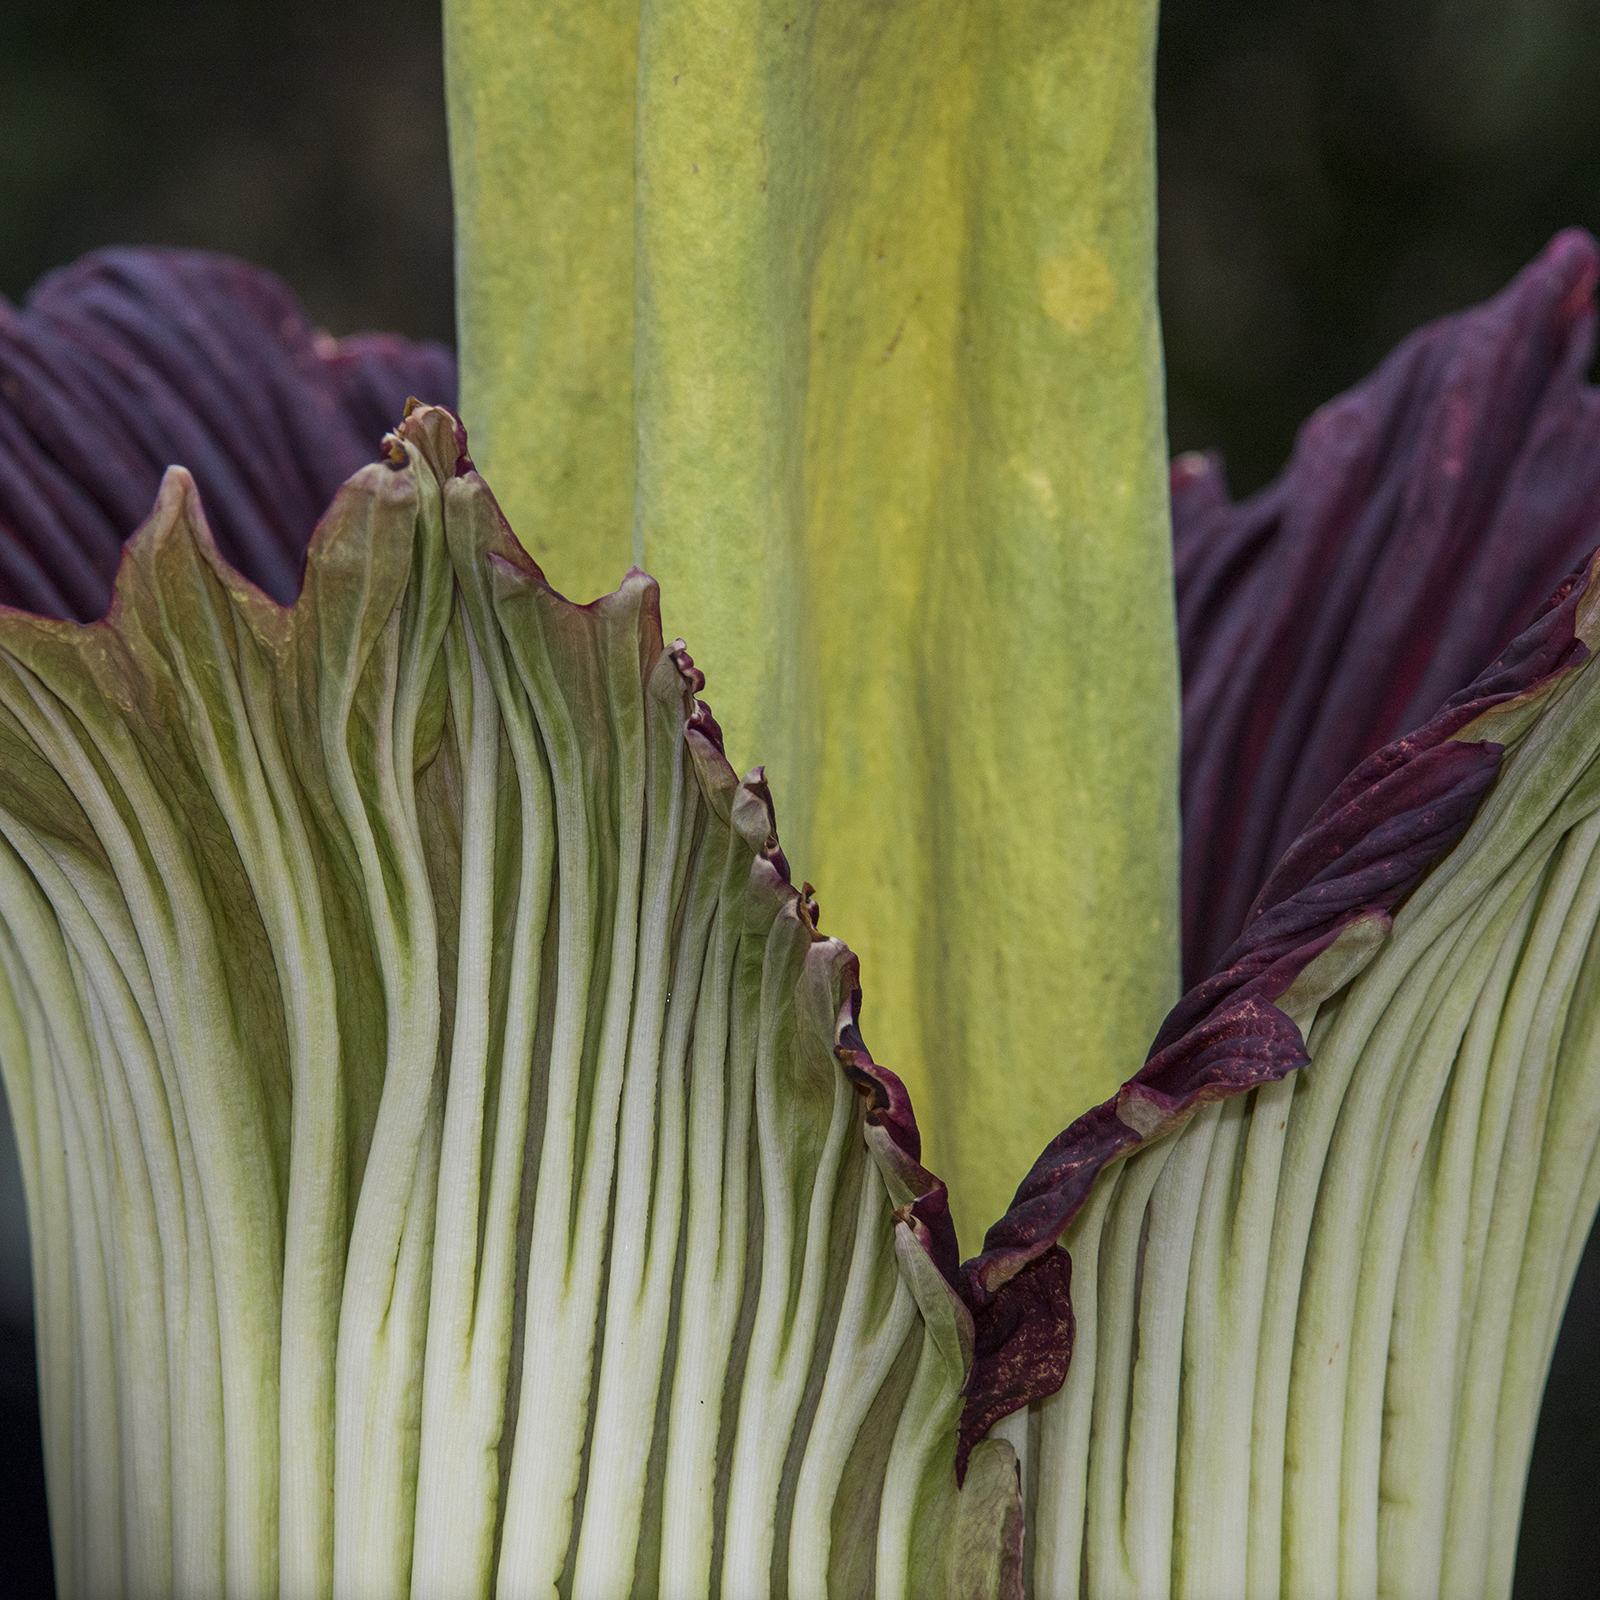 About that name: behind Alice the Amorphophallus